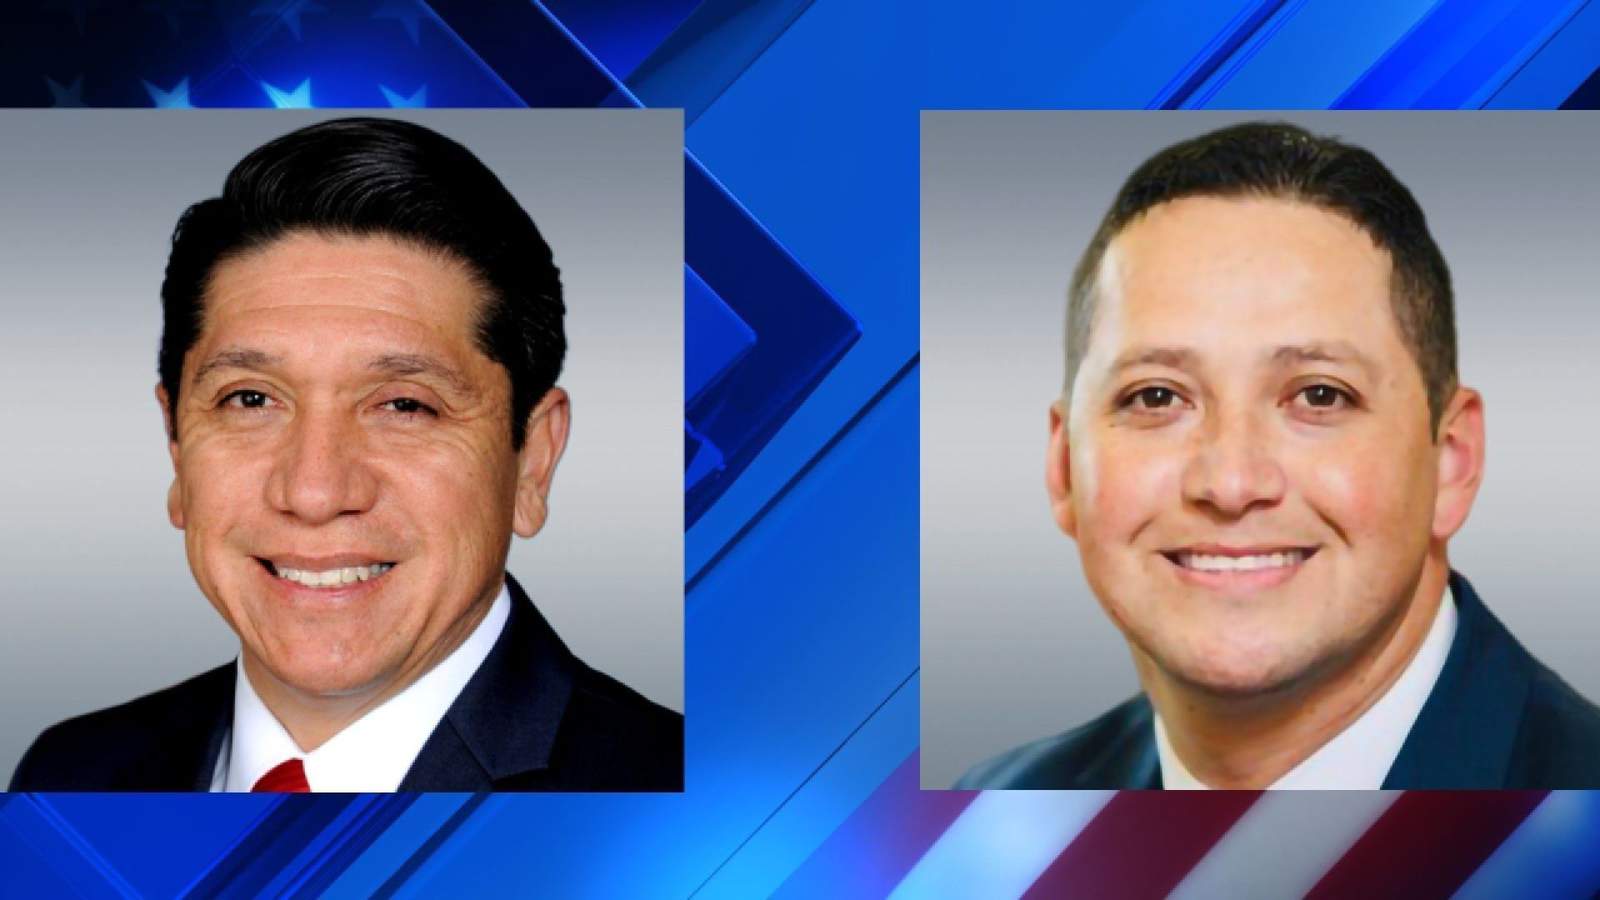 Tony Gonzales campaign says he won by 23 votes, calls the race a victory